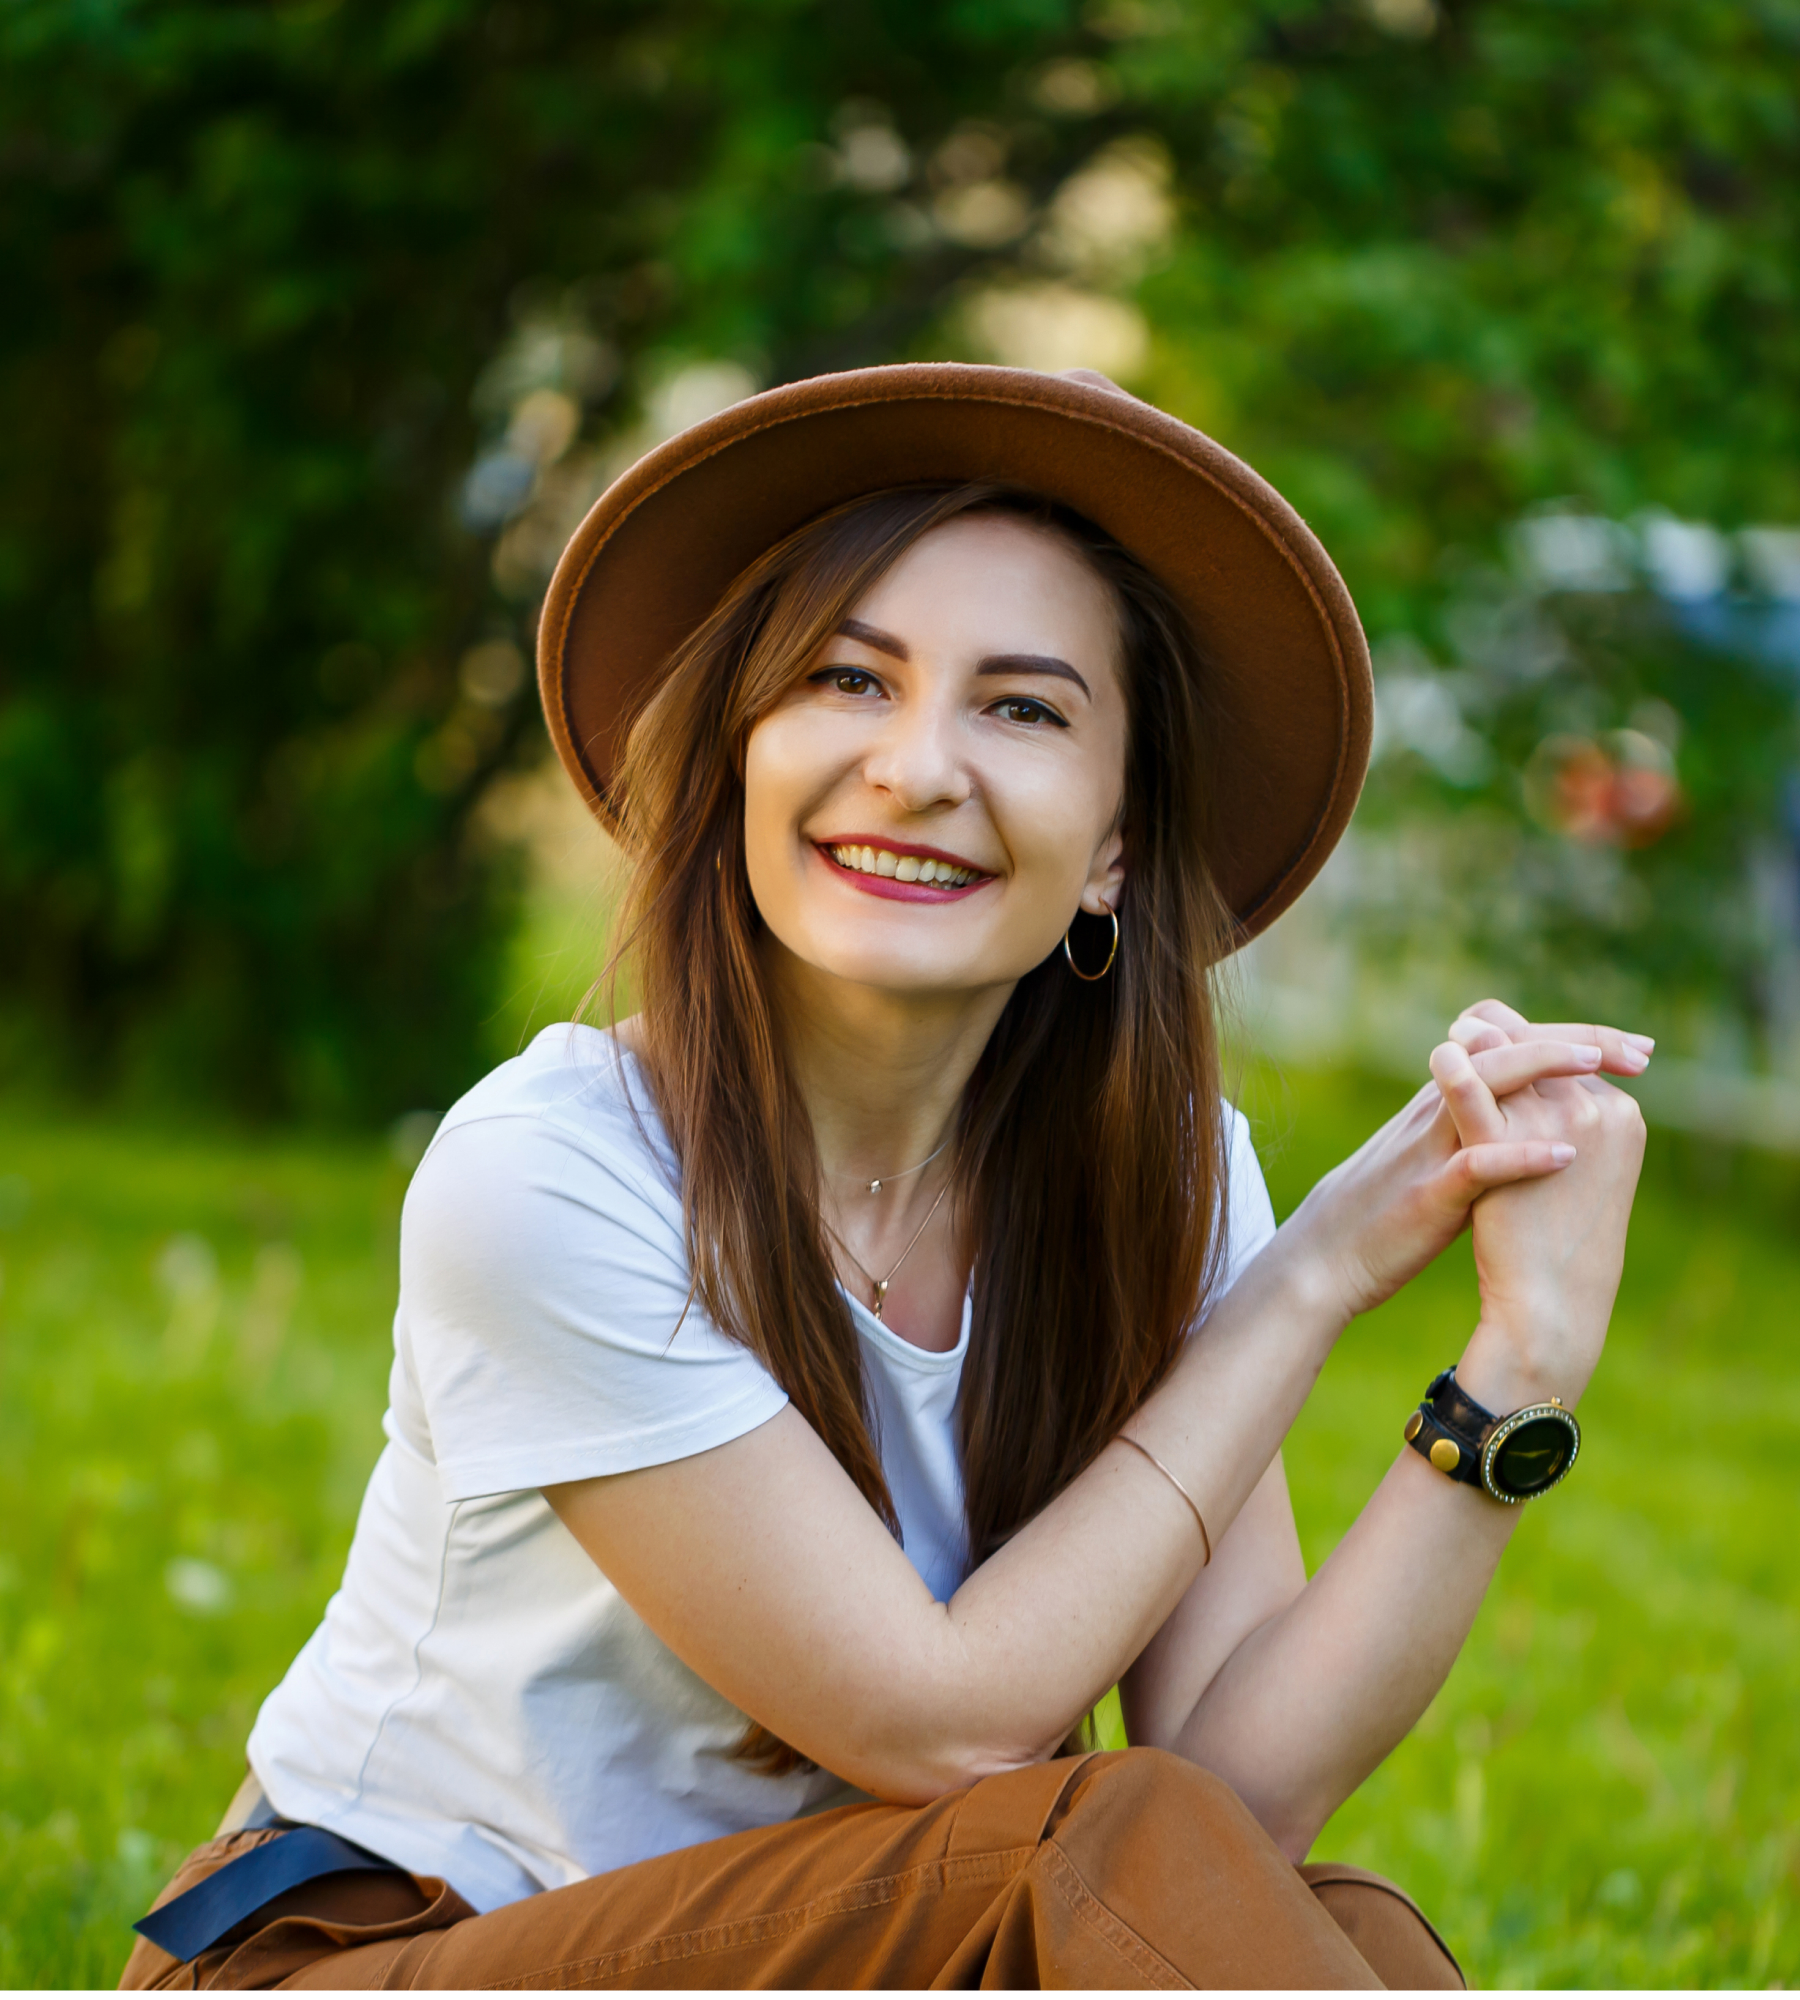 woman sitting outside smiling